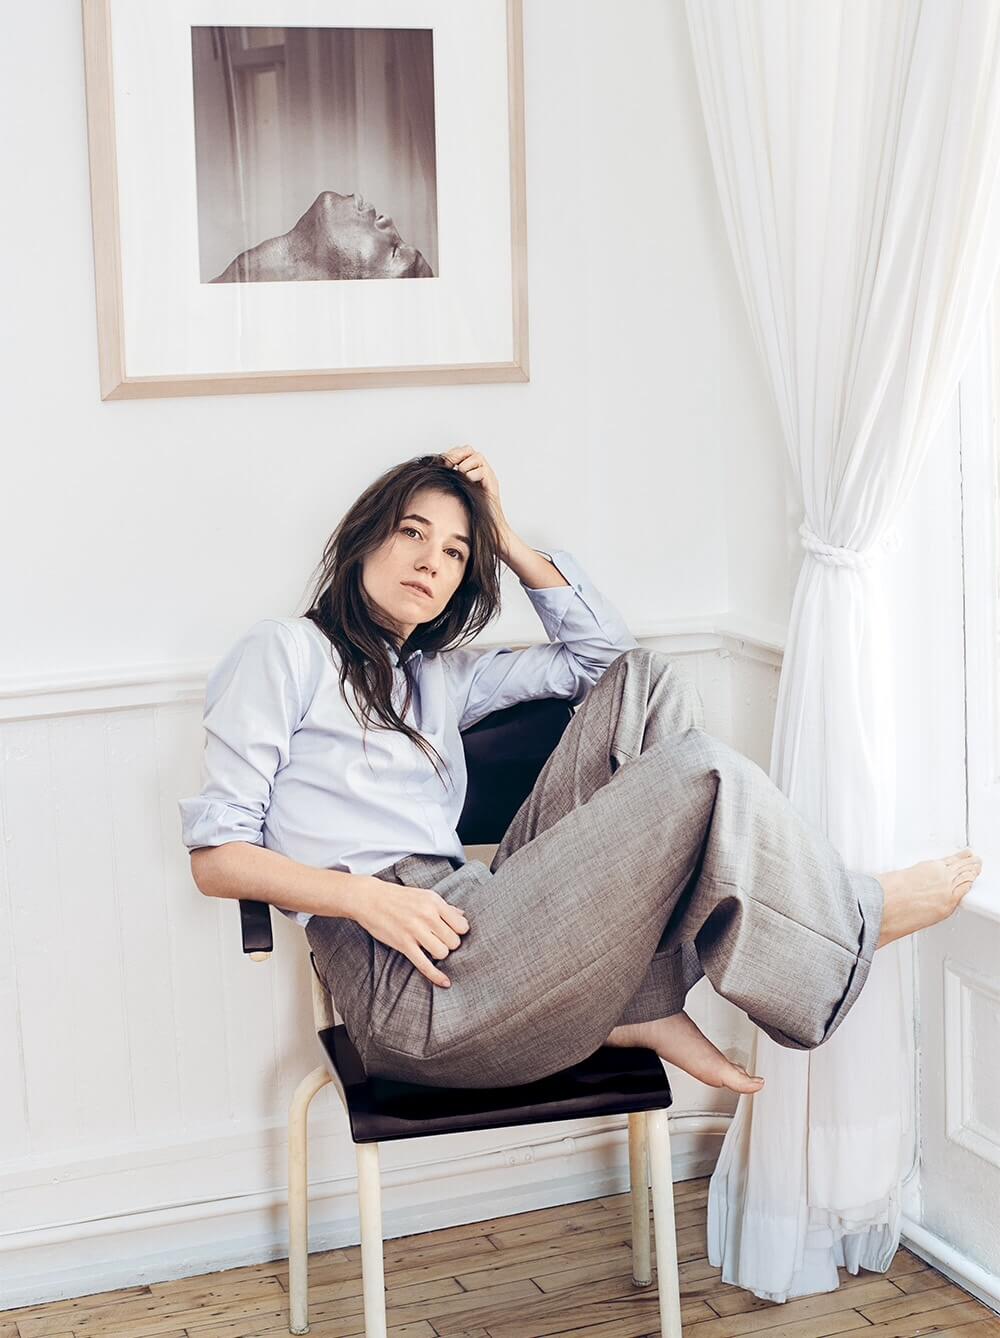 Hot And Sexy Charlotte Gainsbourg Photos.